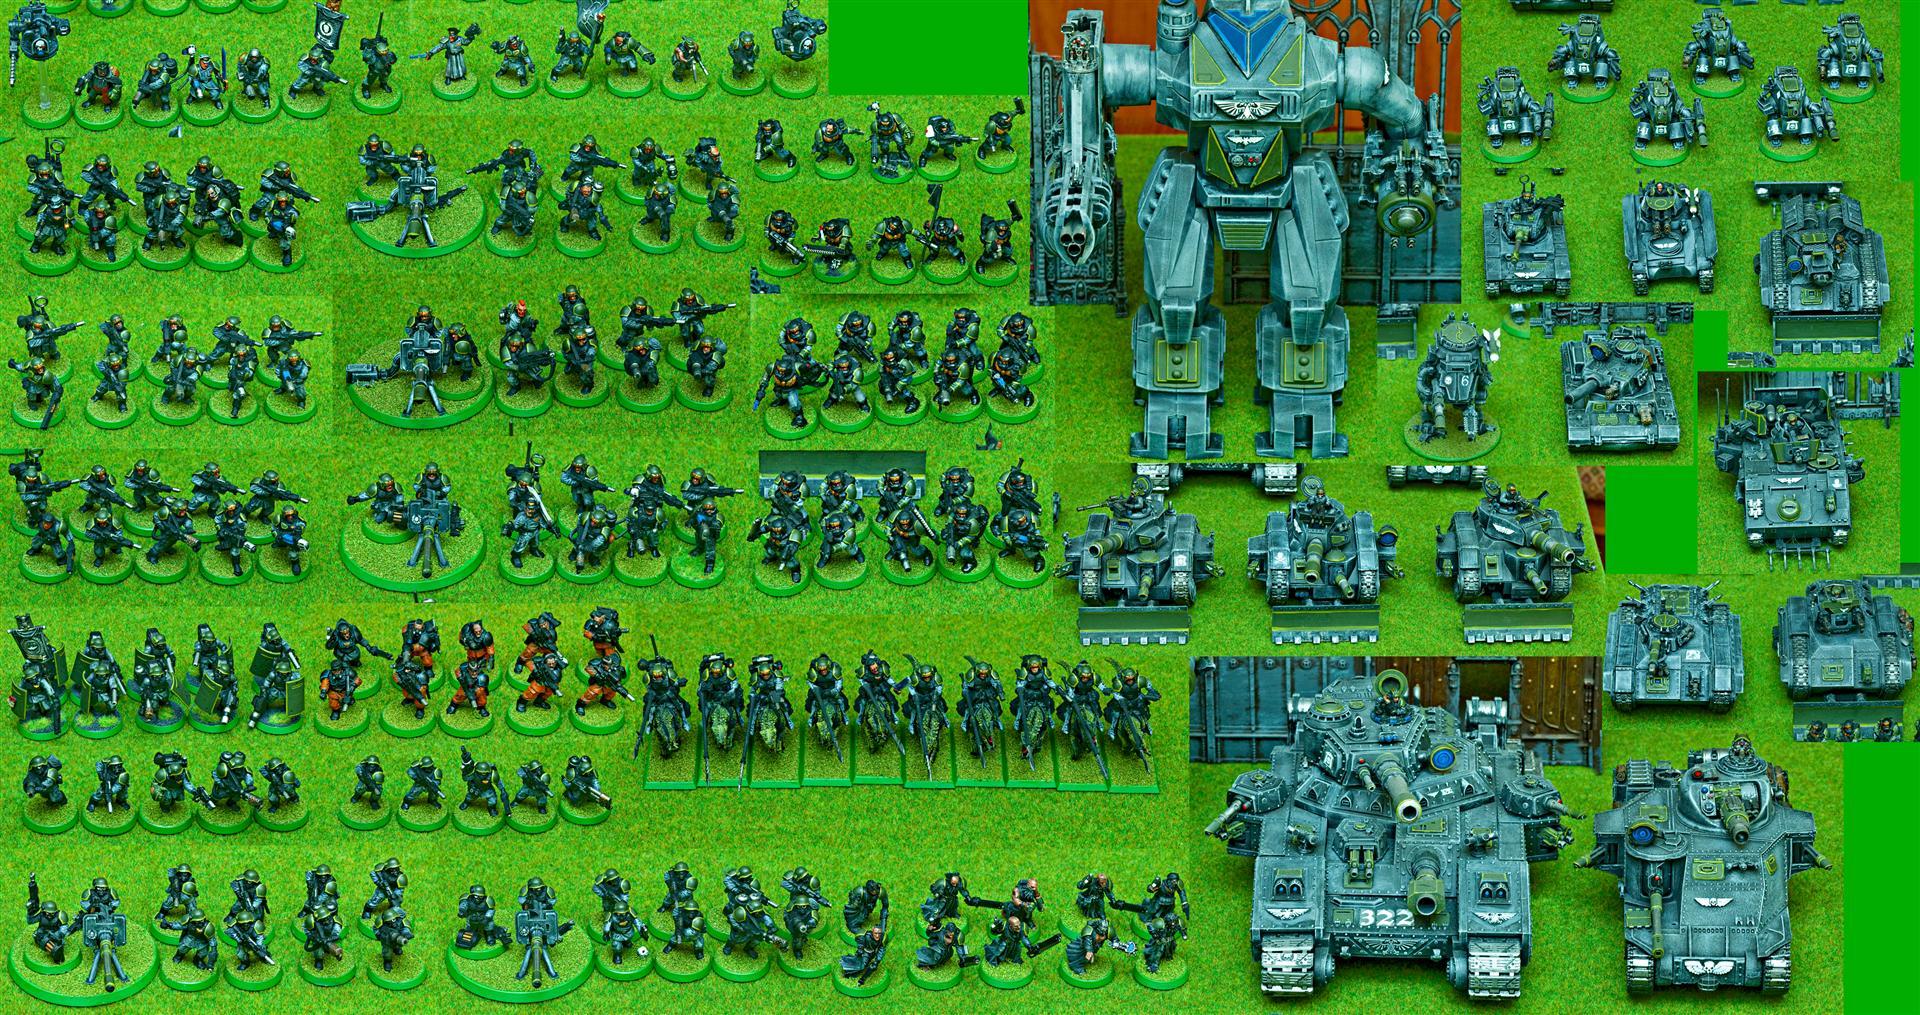 Apocalypse, Army, Astra Militarum, At43, Baneblade, Chimera, Chimeras, Comissar, Command Squad, Commander, Conversion, Count As, Gaming Mat, Green, Grey, Guard, Guard Army, Heavy Weapon, Hellhound, Imperial, Imperial Guard, Imperials, Leman Russ, Leman Russ Squadron, Malcador, Penal Legion, Penal Legion Squad, Priest, Rough Riders, Sentinel, Spyker Battle Squad, Verterans, Veteran, Warhound